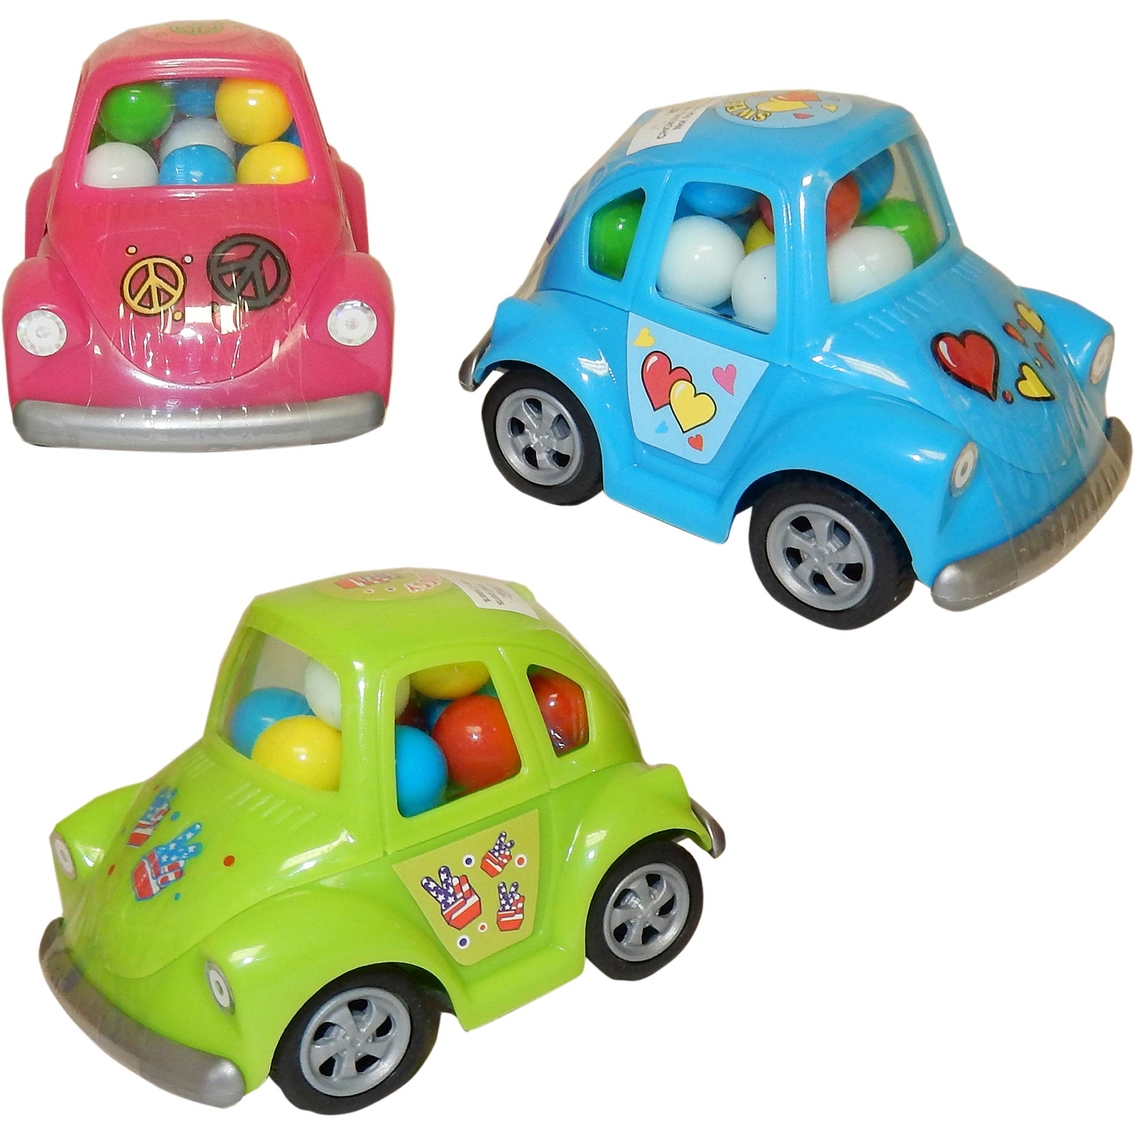 Kidsmania Sweet Groovy Buggies with Candy 12 pk. - Image 2 of 2